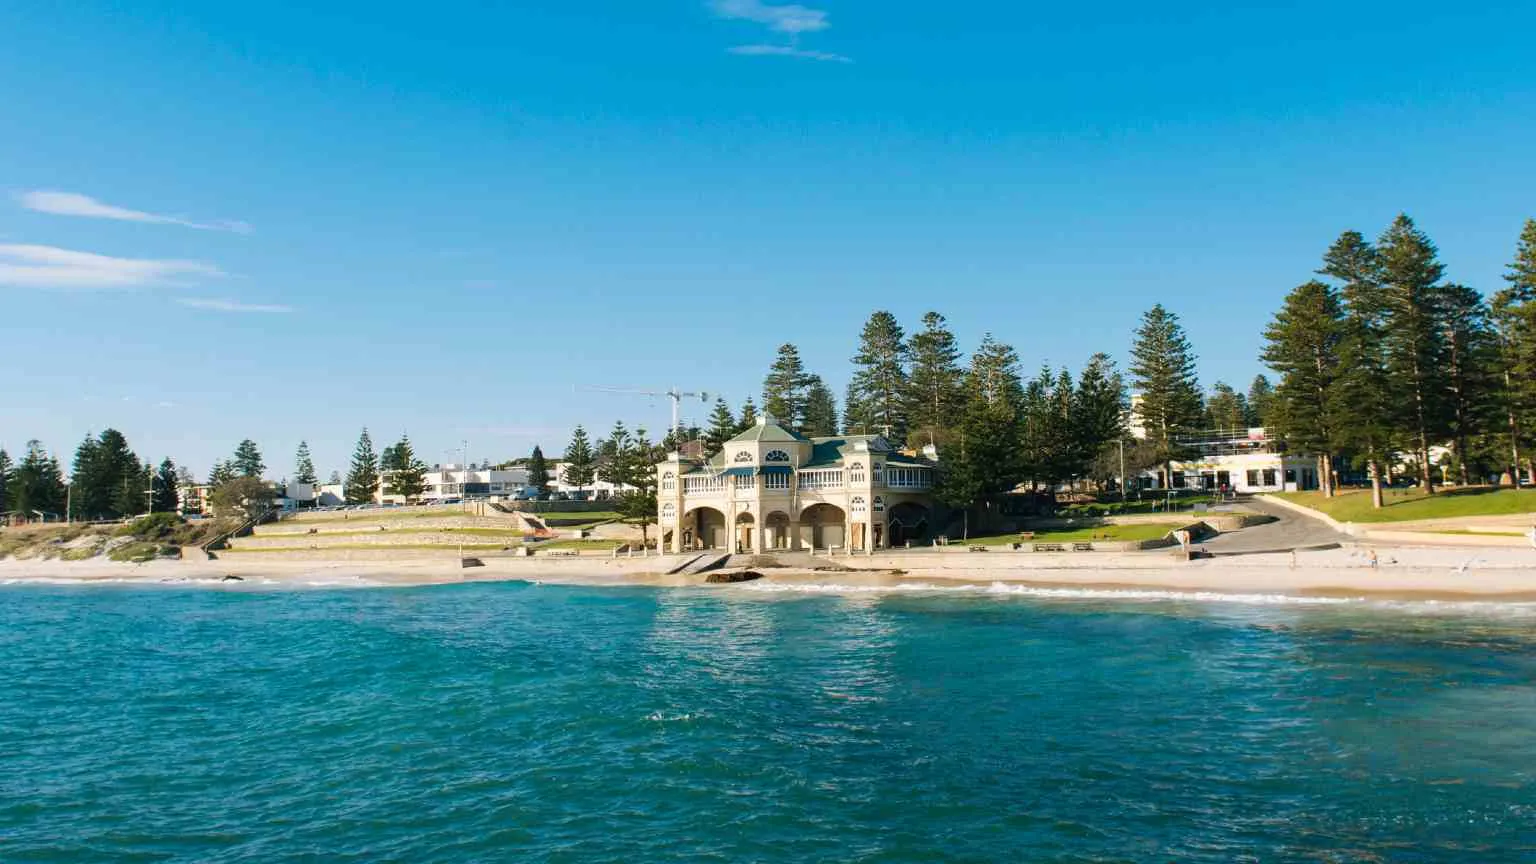 cheap holiday accommodation in perth australia now